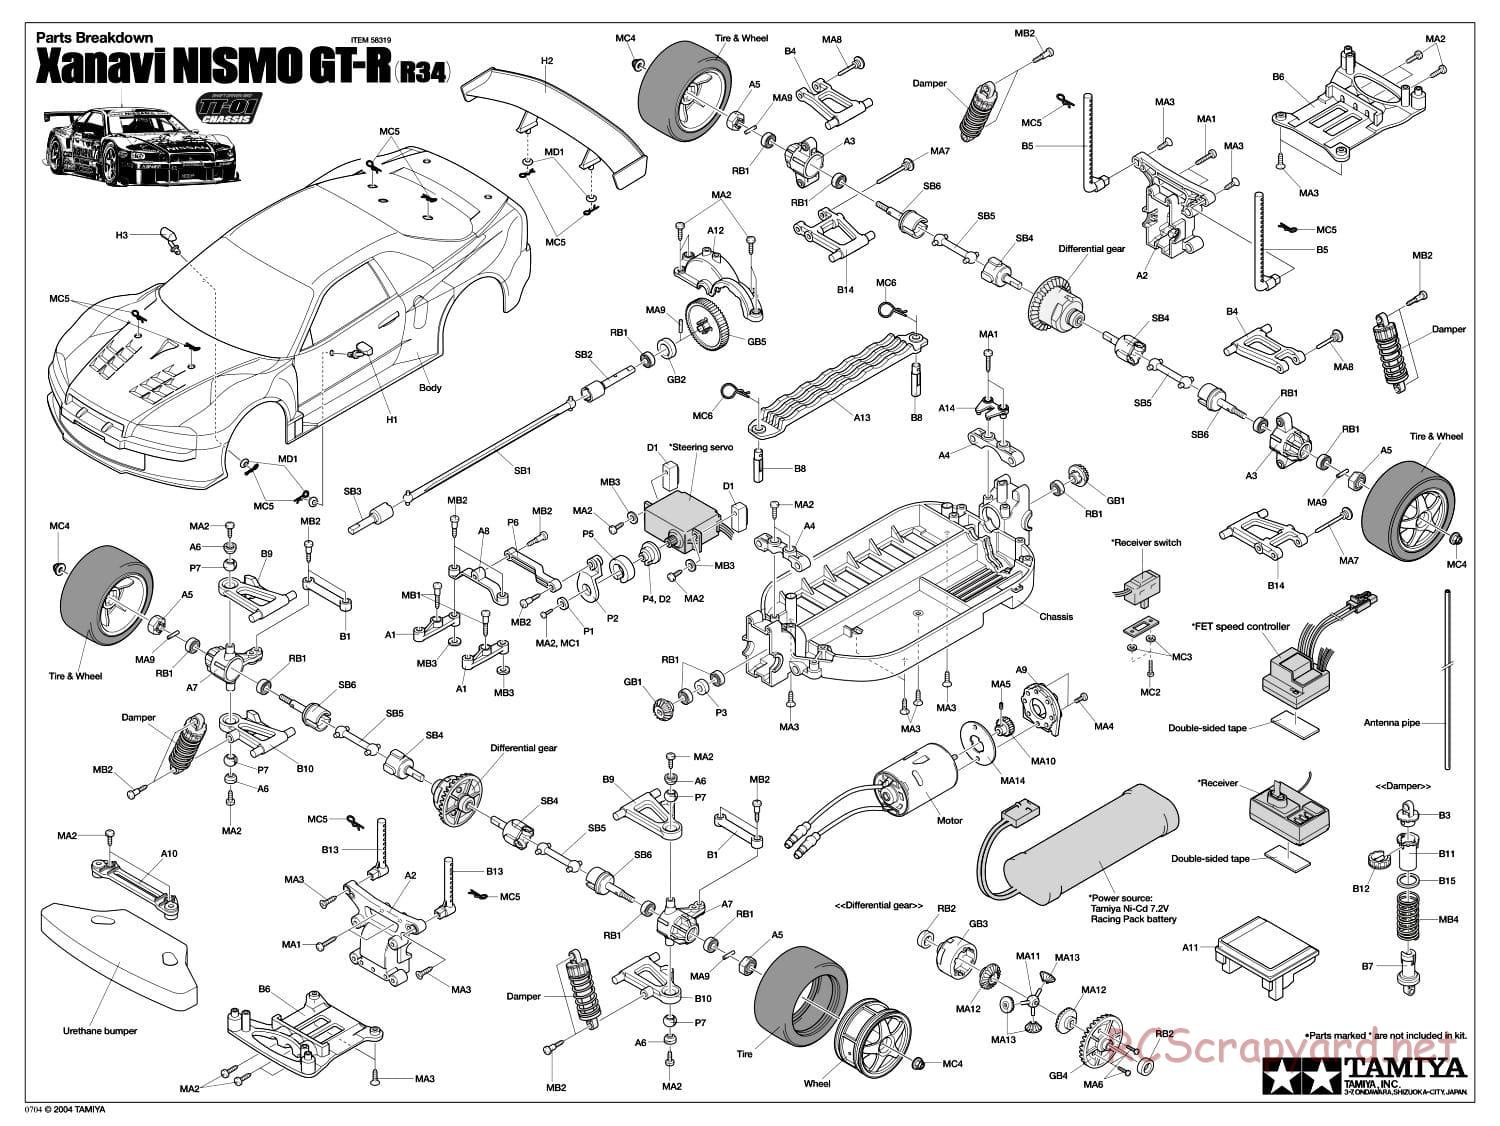 Tamiya - Xanavi Nismo GT-R R34 - TT-01 Chassis - Exploded View